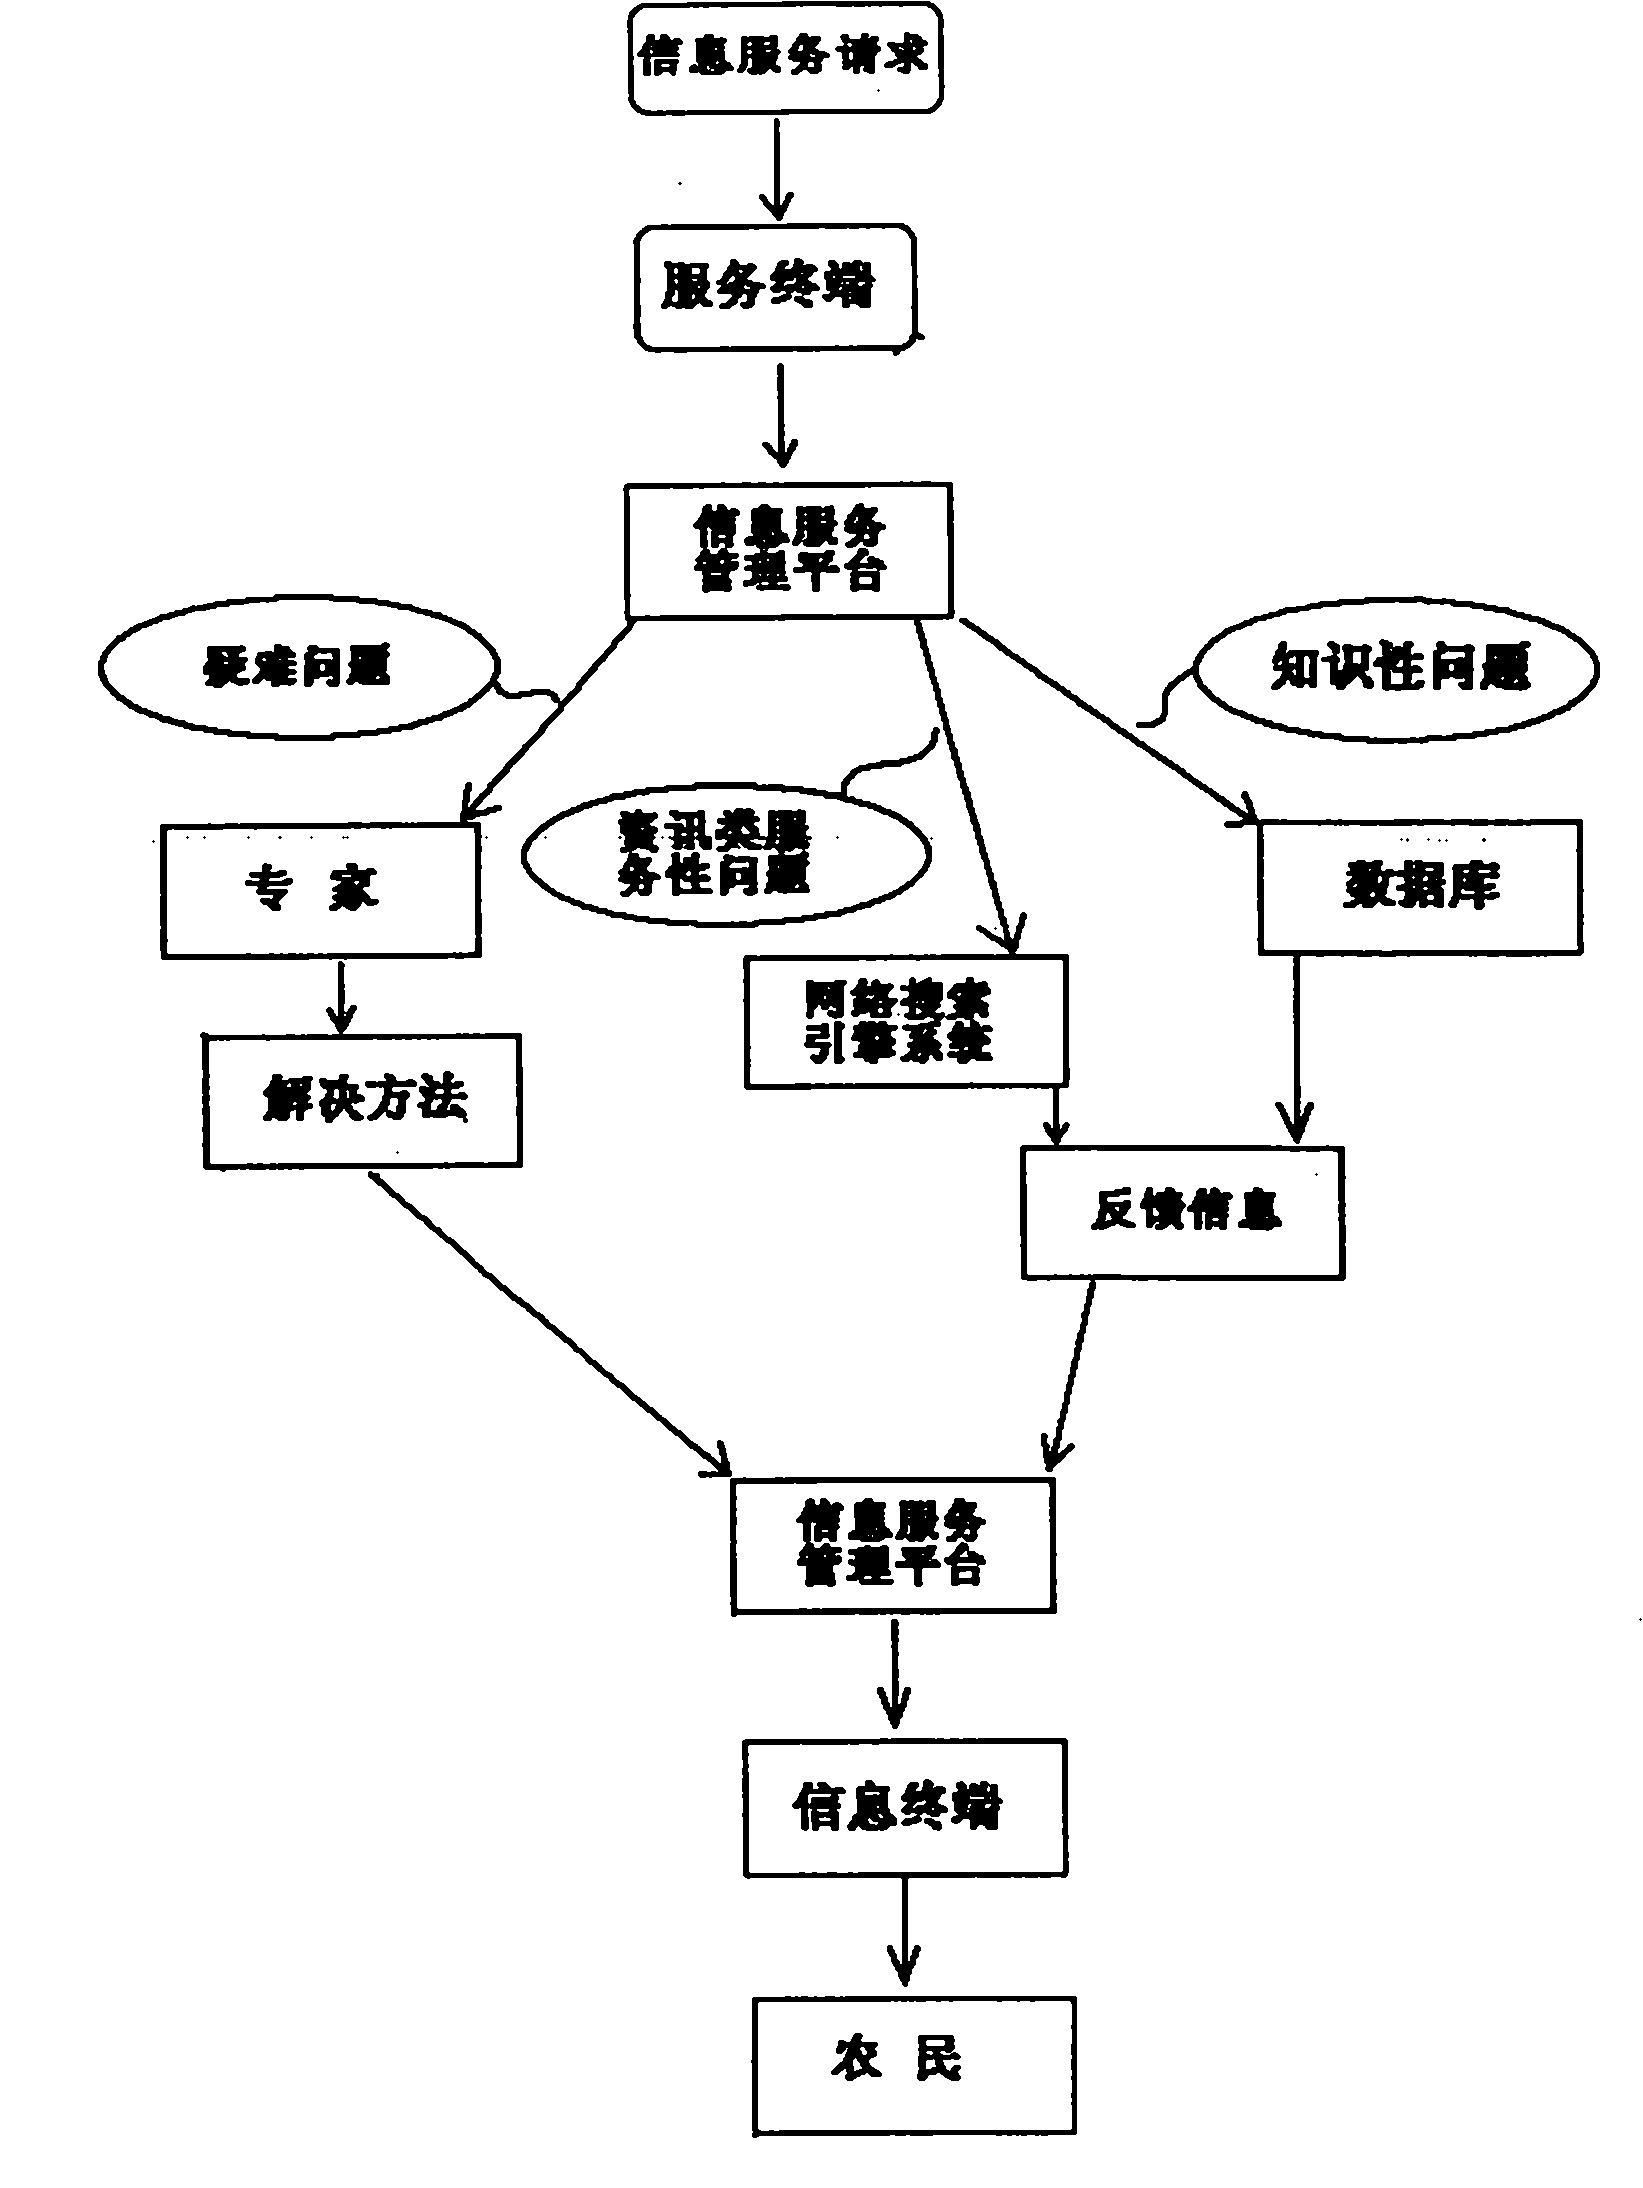 System and method for rural information service and comprehensive management